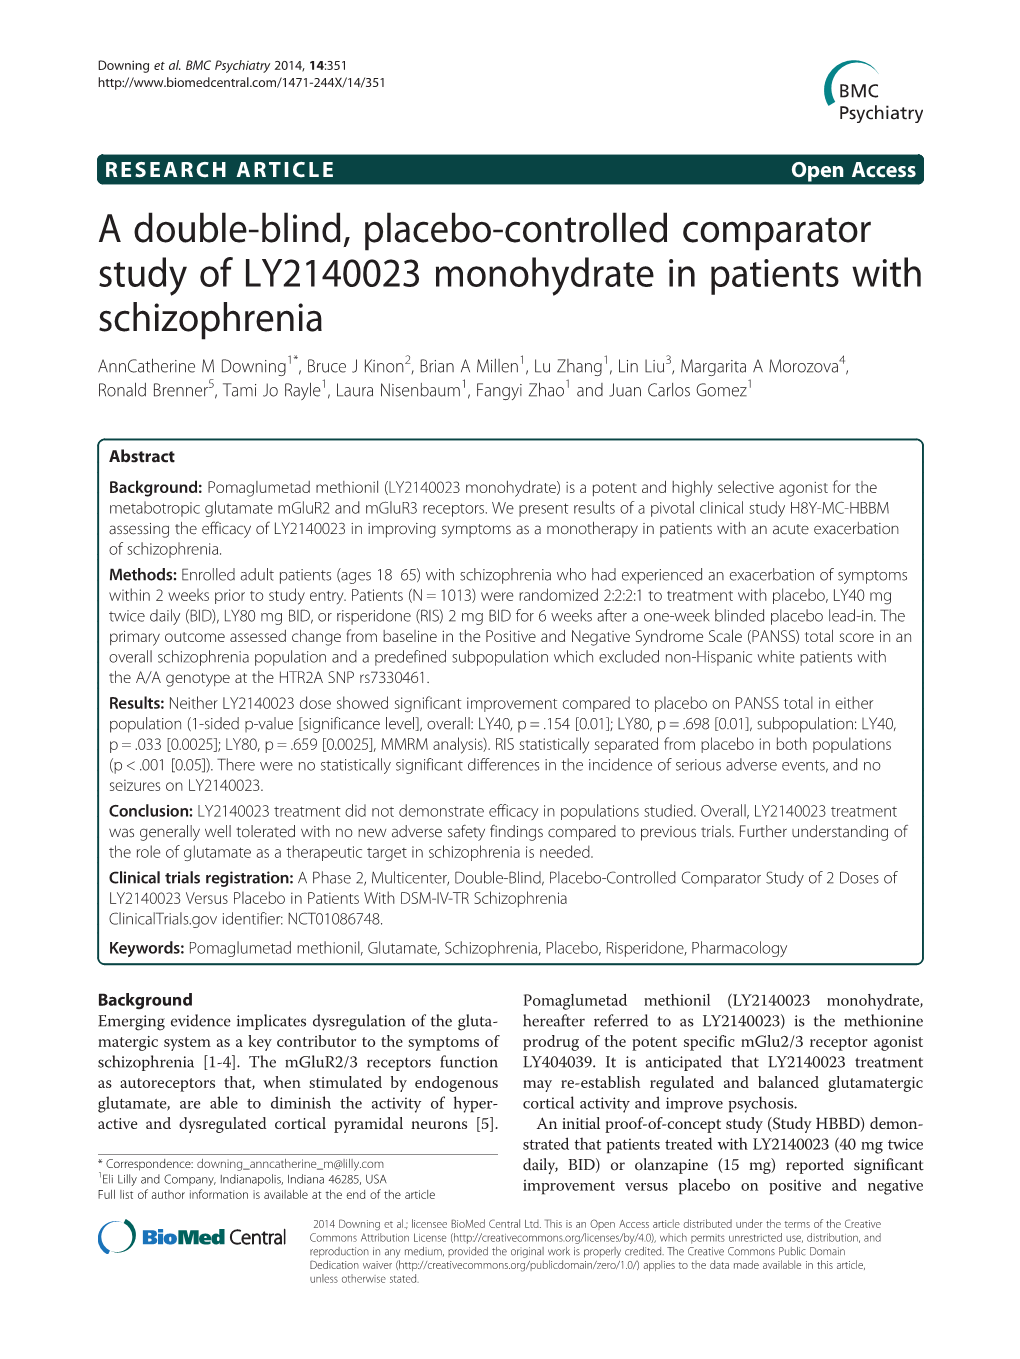 A Double-Blind, Placebo-Controlled Comparator Study of LY2140023